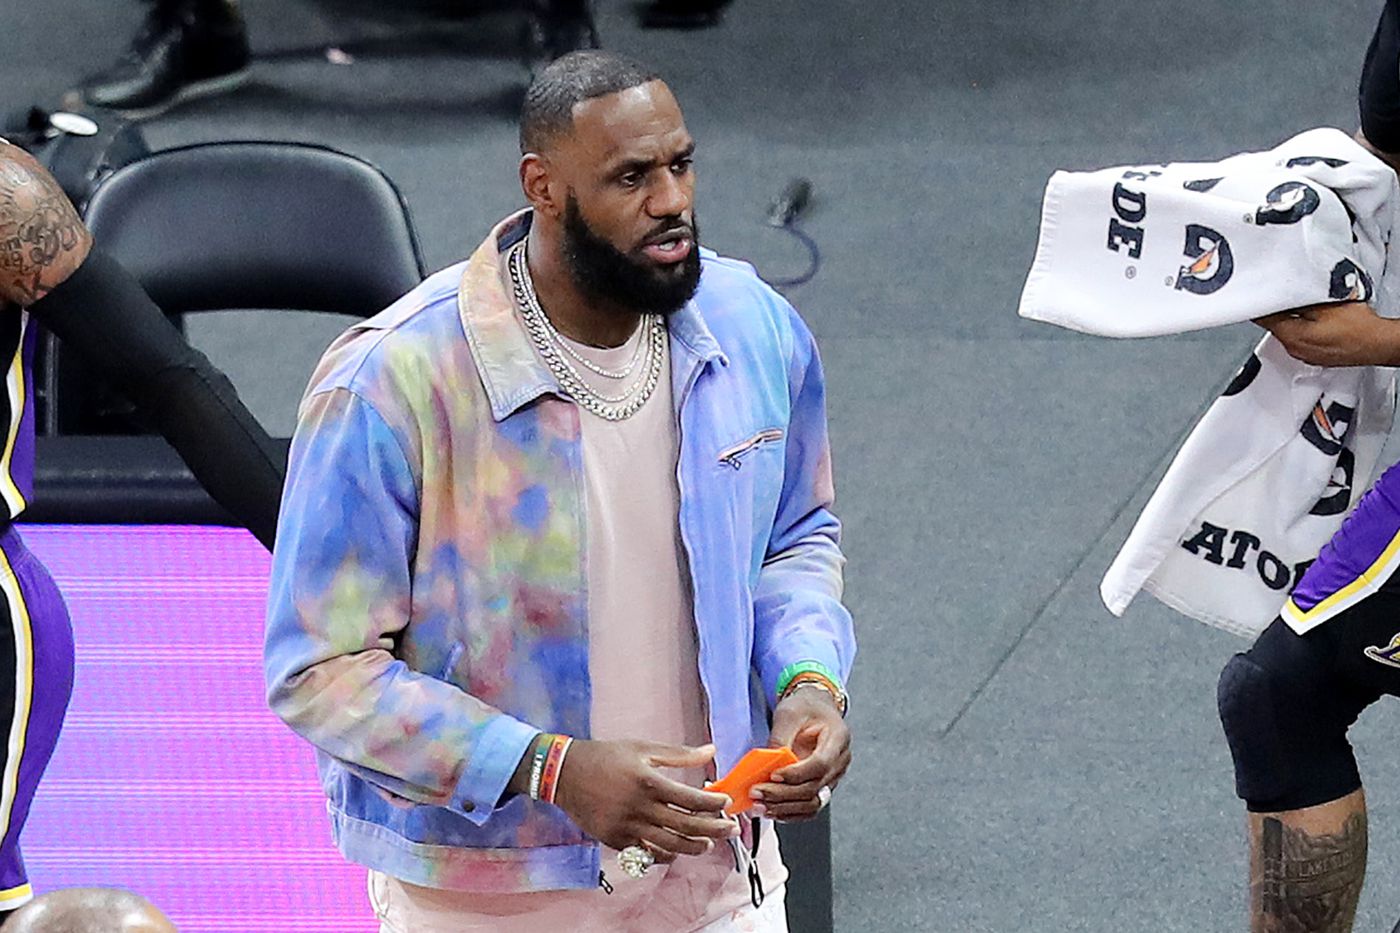 LeStyle! LeBron James, decked out in a stunning jacket for the 'Icons of Style' project